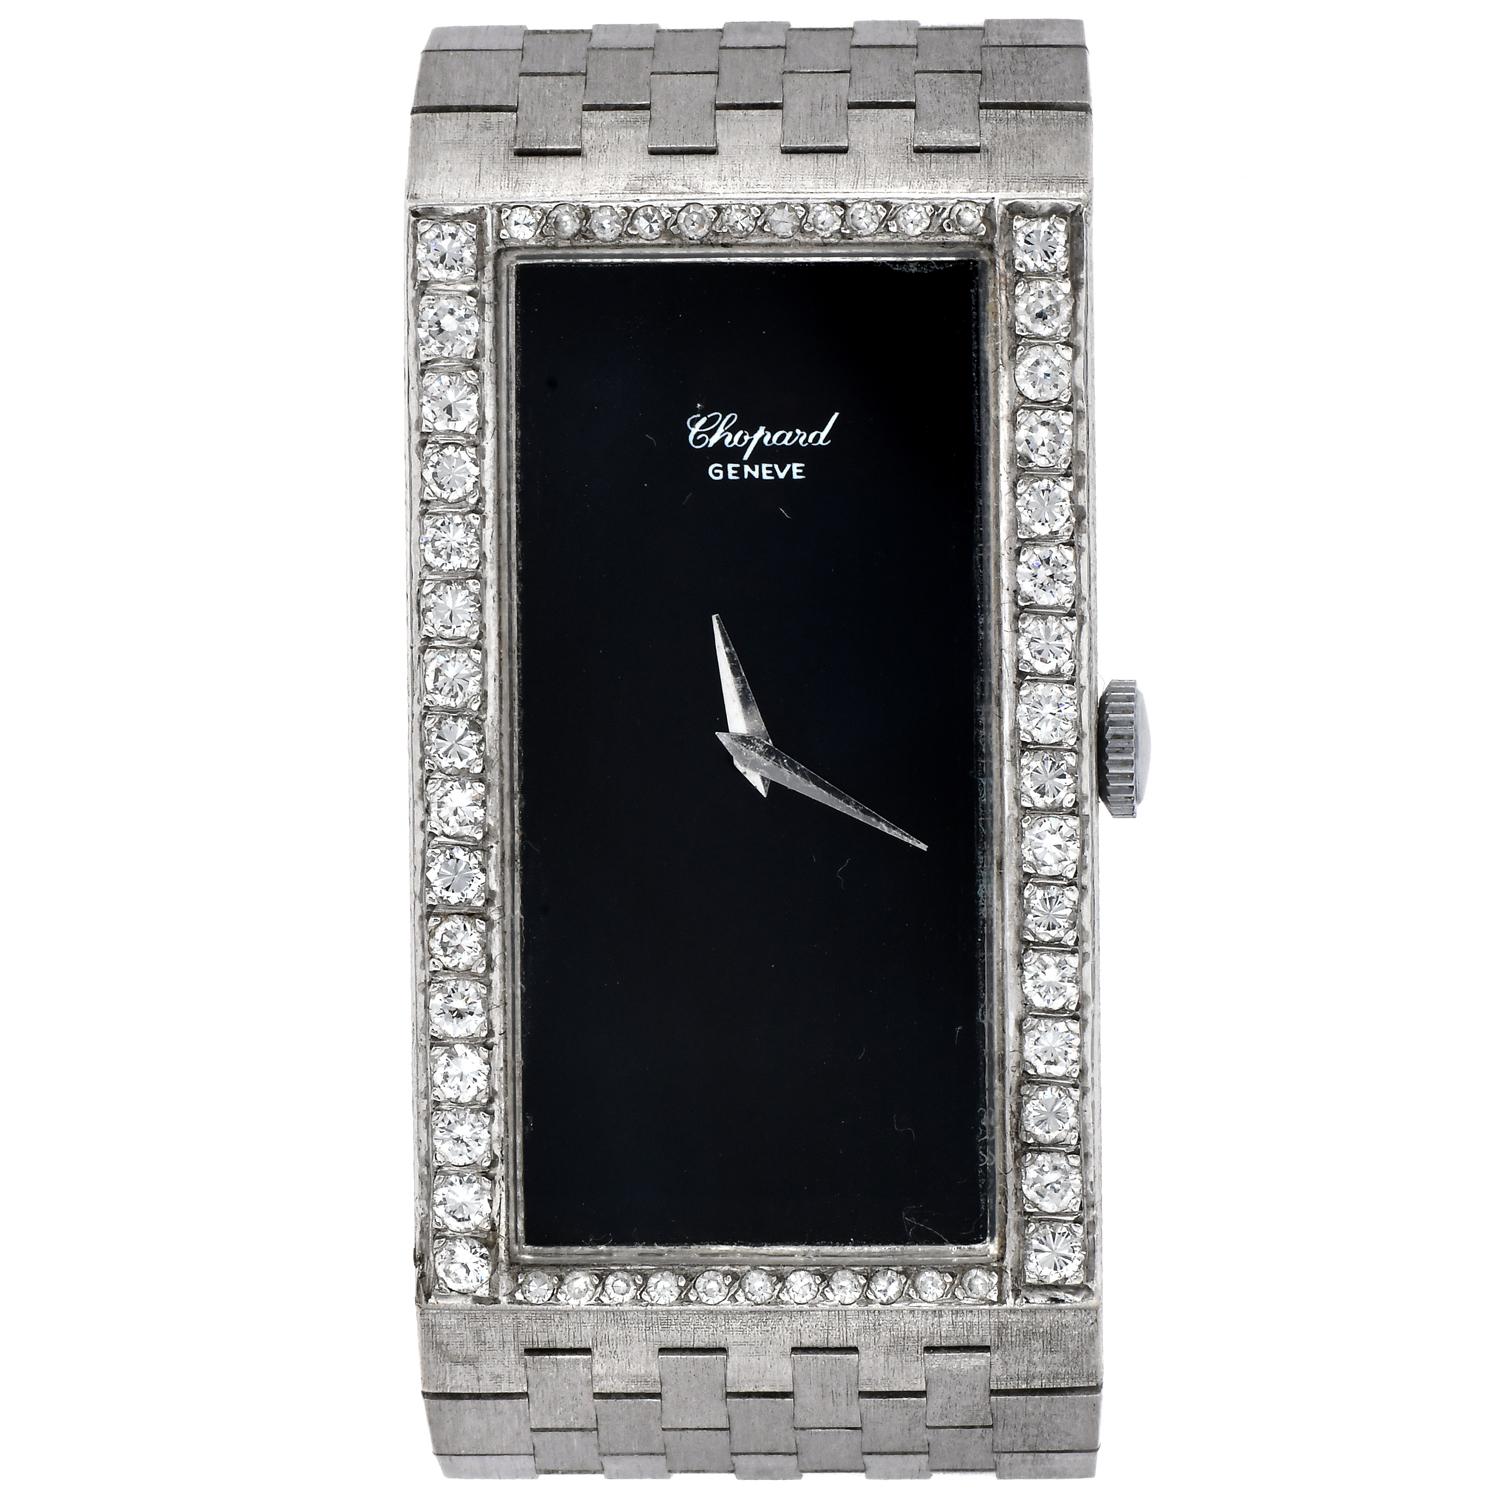 An exquisite Vintage large Chopard Diamond and onyx 18K White Gold Rectangular  Winding Ladies' Watch.

Completely crafted in 18K White Gold, weighing approximately 66.3 grams.

Features a halo of dazzling Genuine round Diamonds, 54 in total,